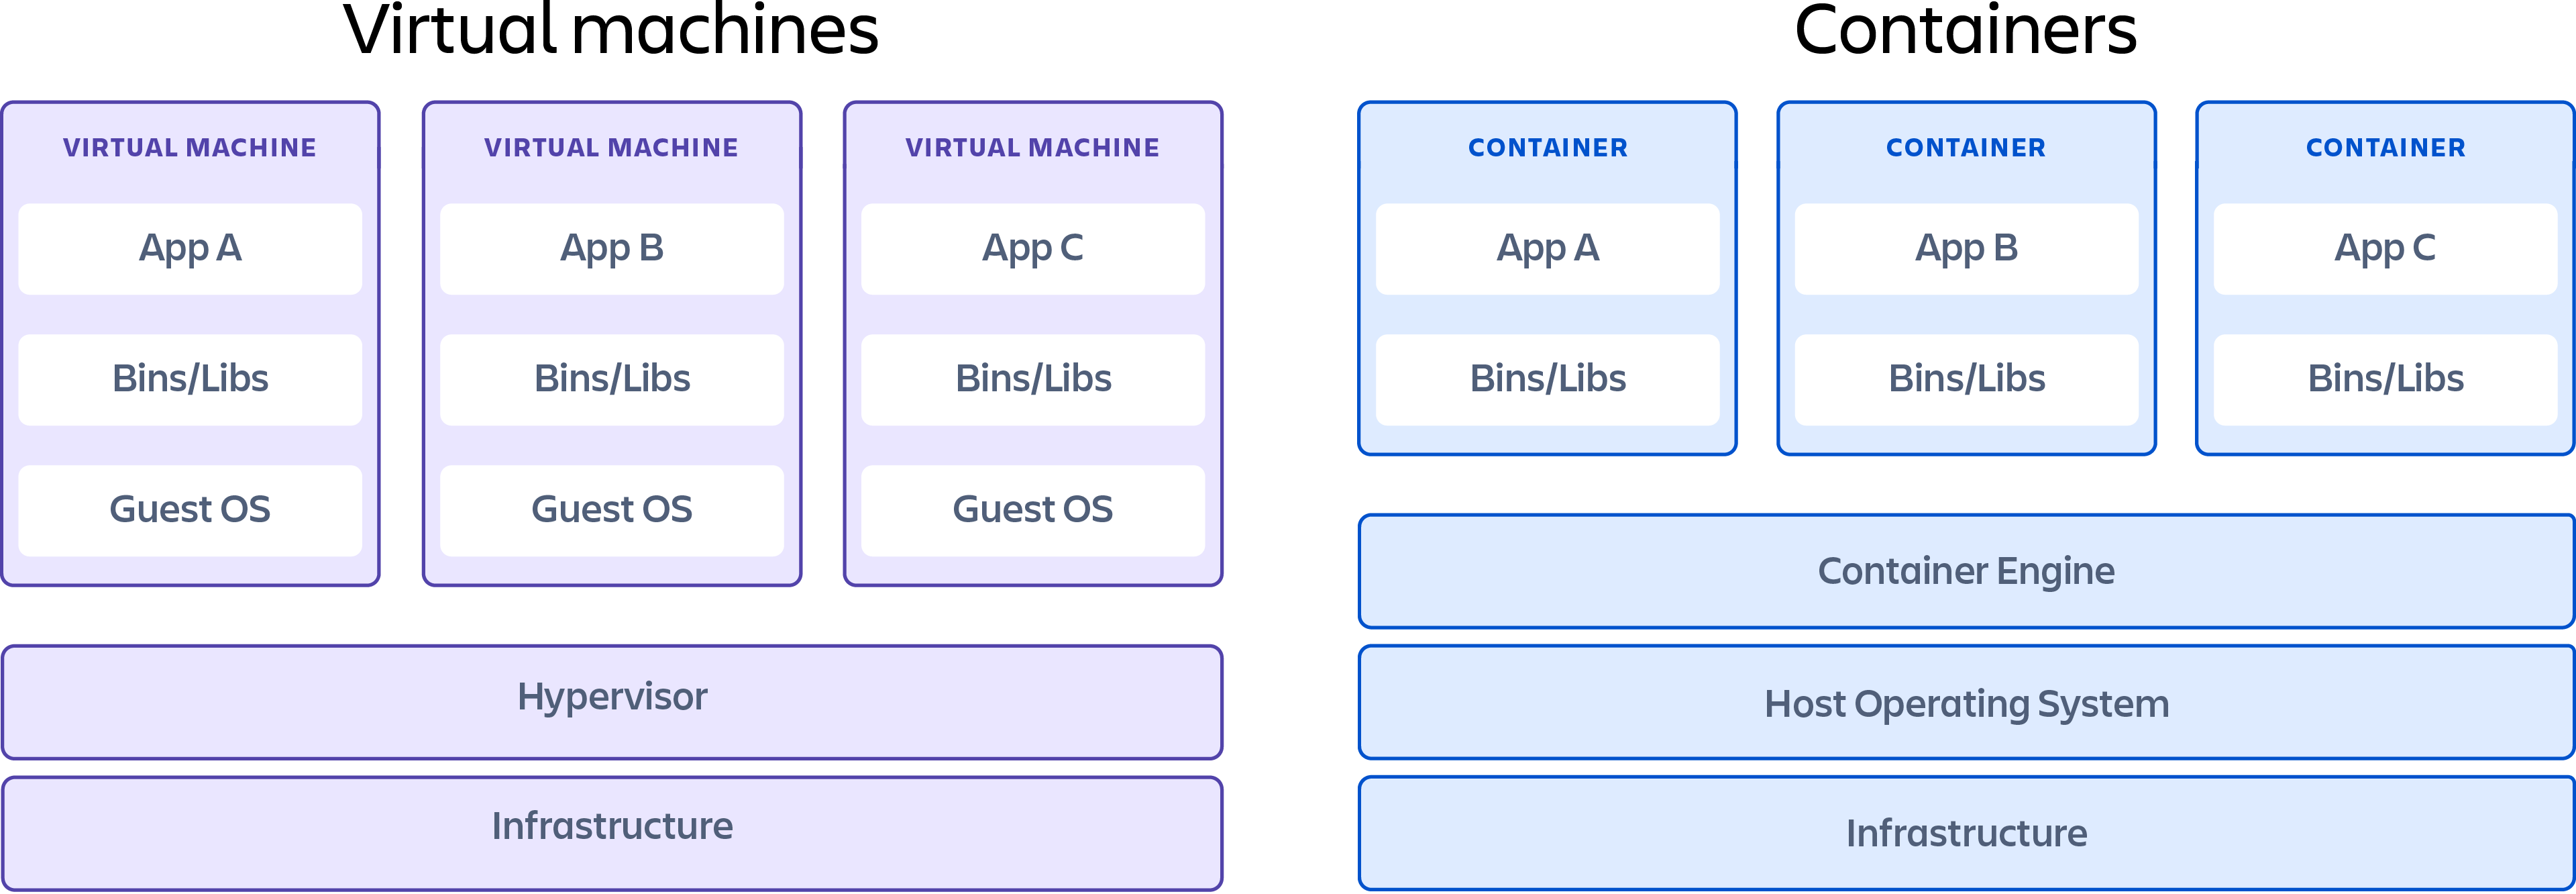 A container showing the differences between virtual machines and containers.